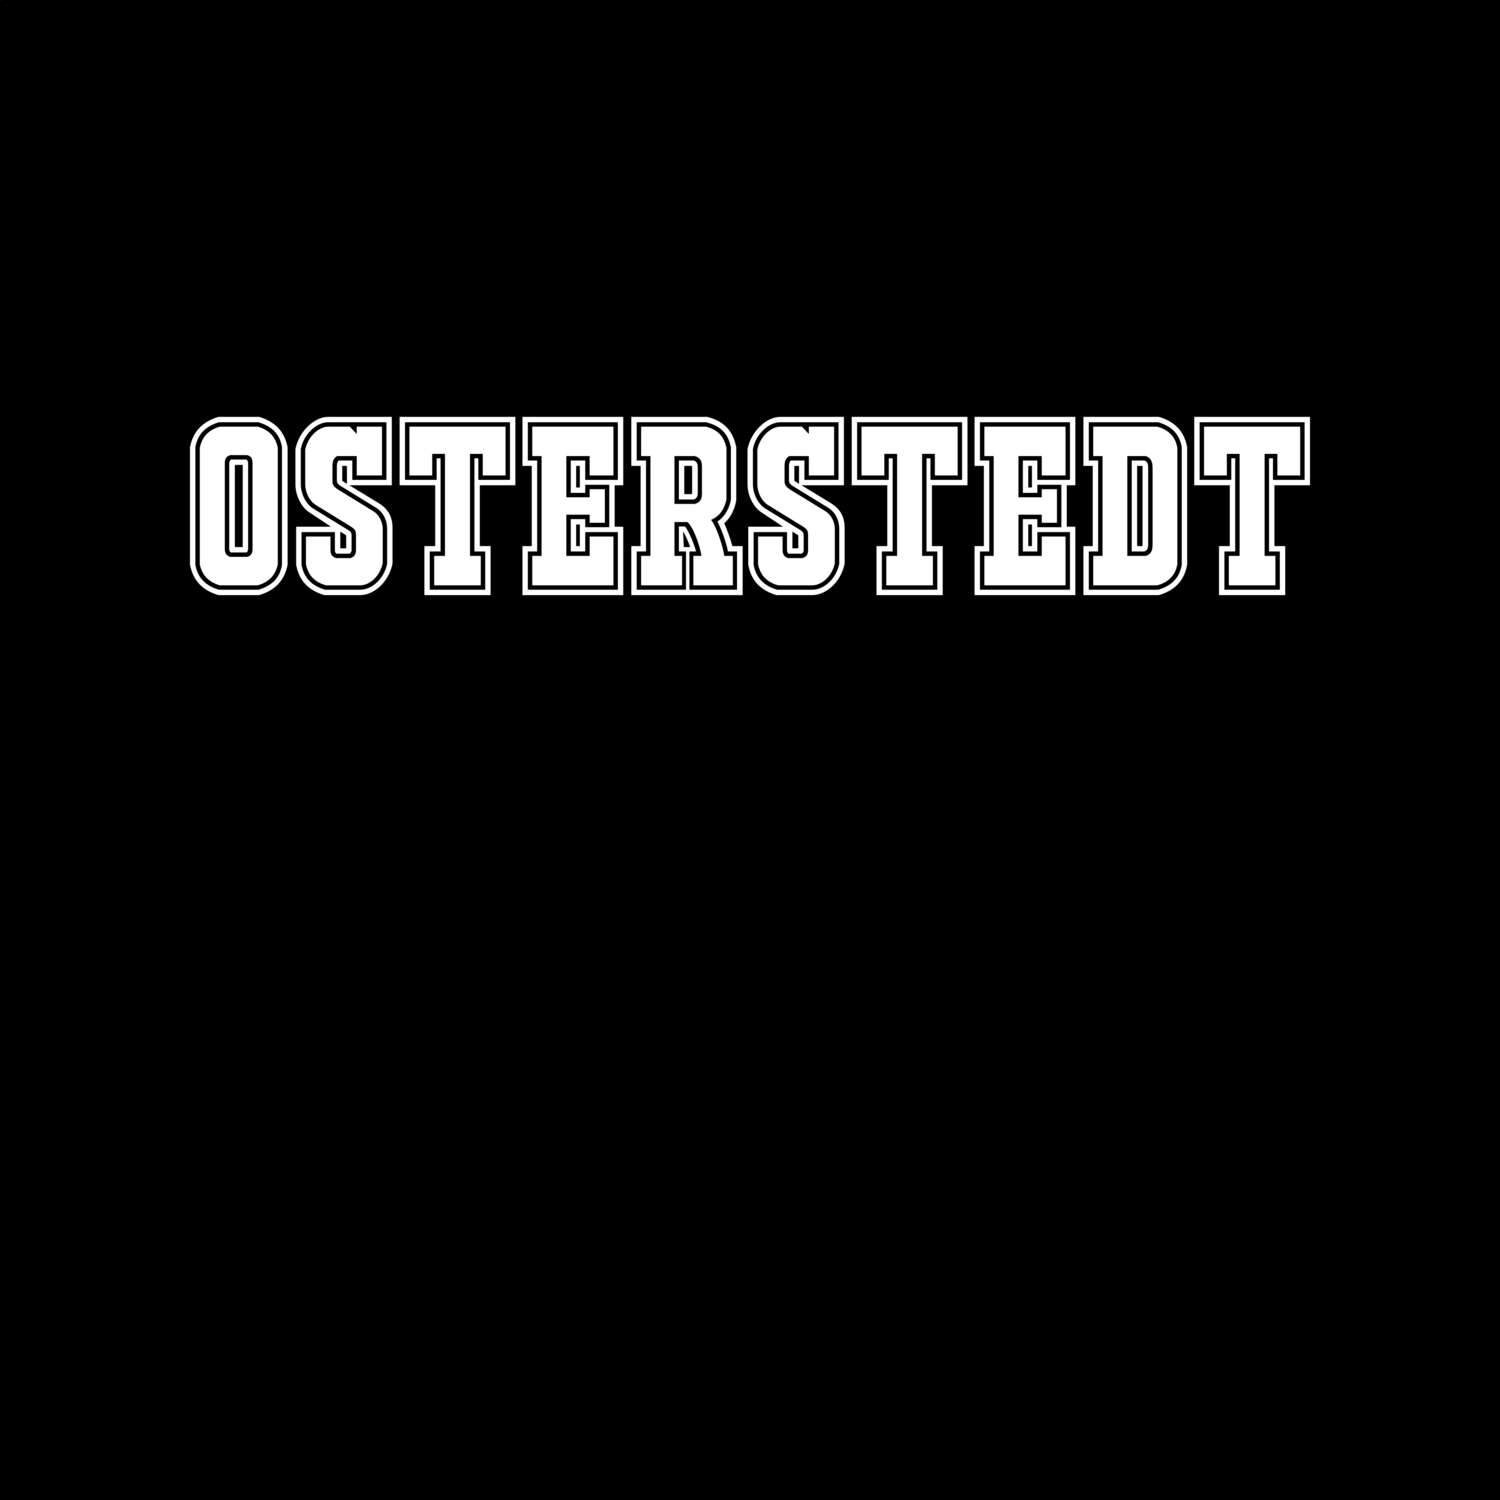 Osterstedt T-Shirt »Classic«